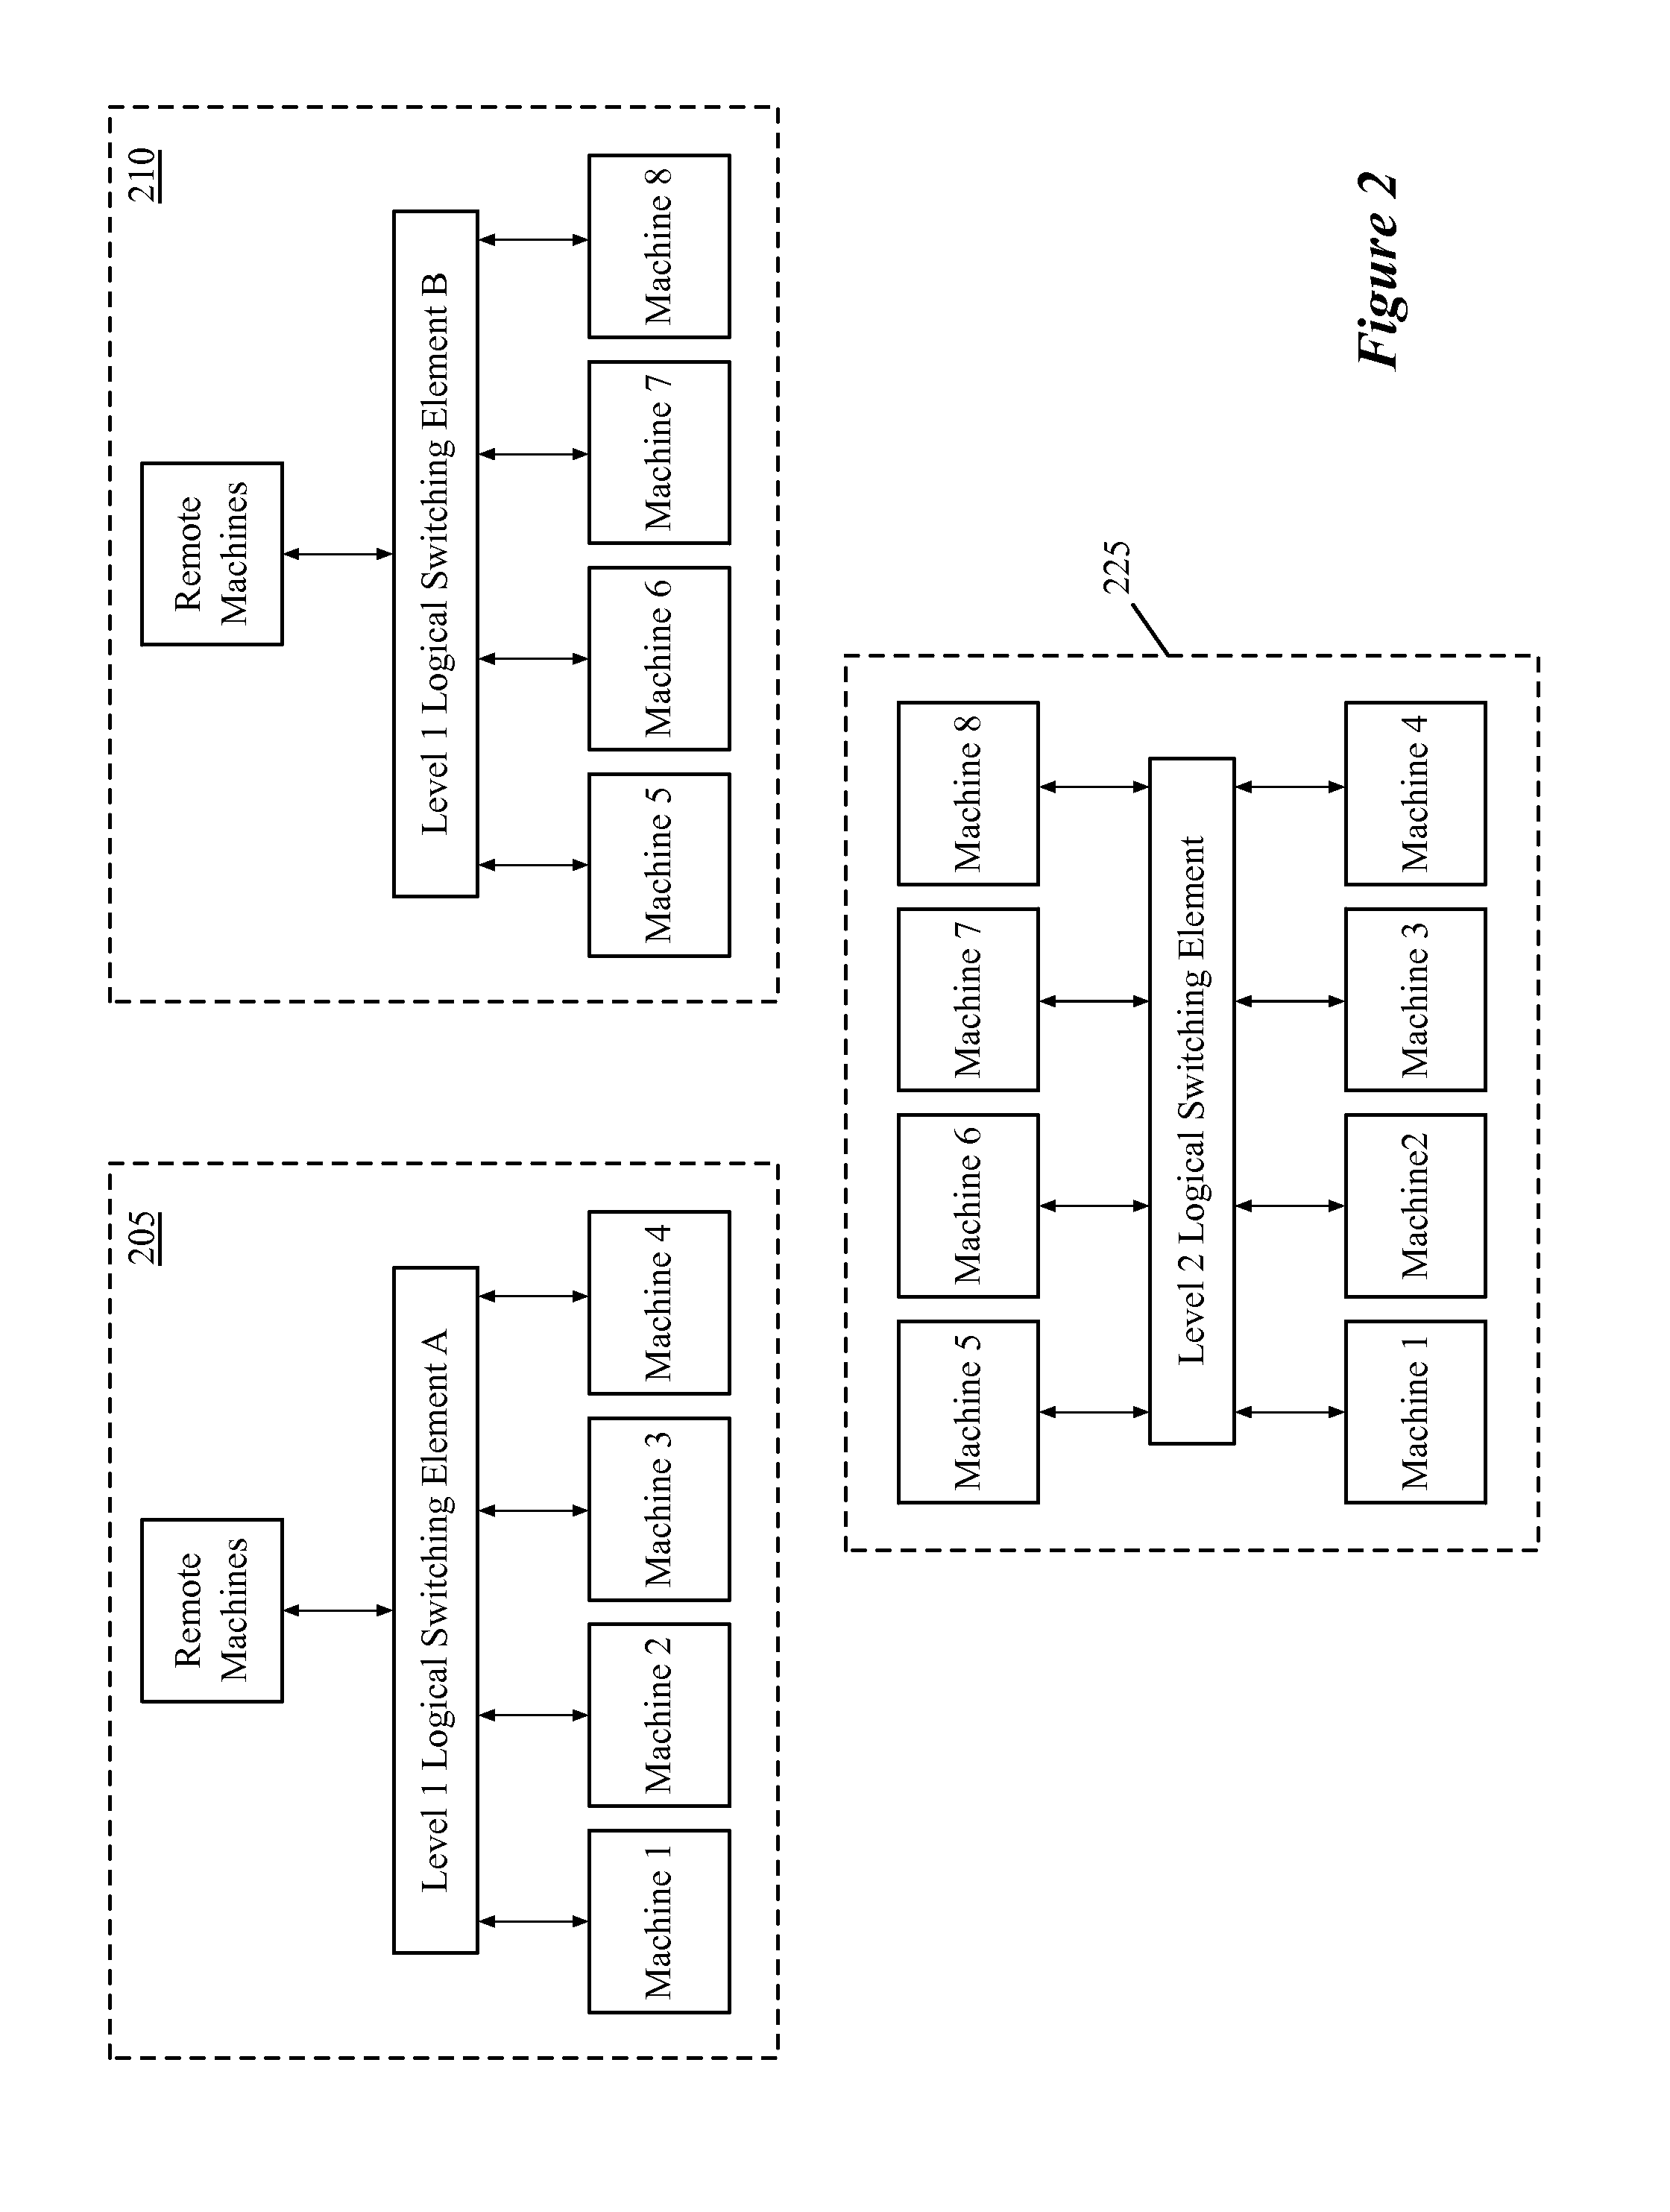 Generating flows for managed interconnection switches